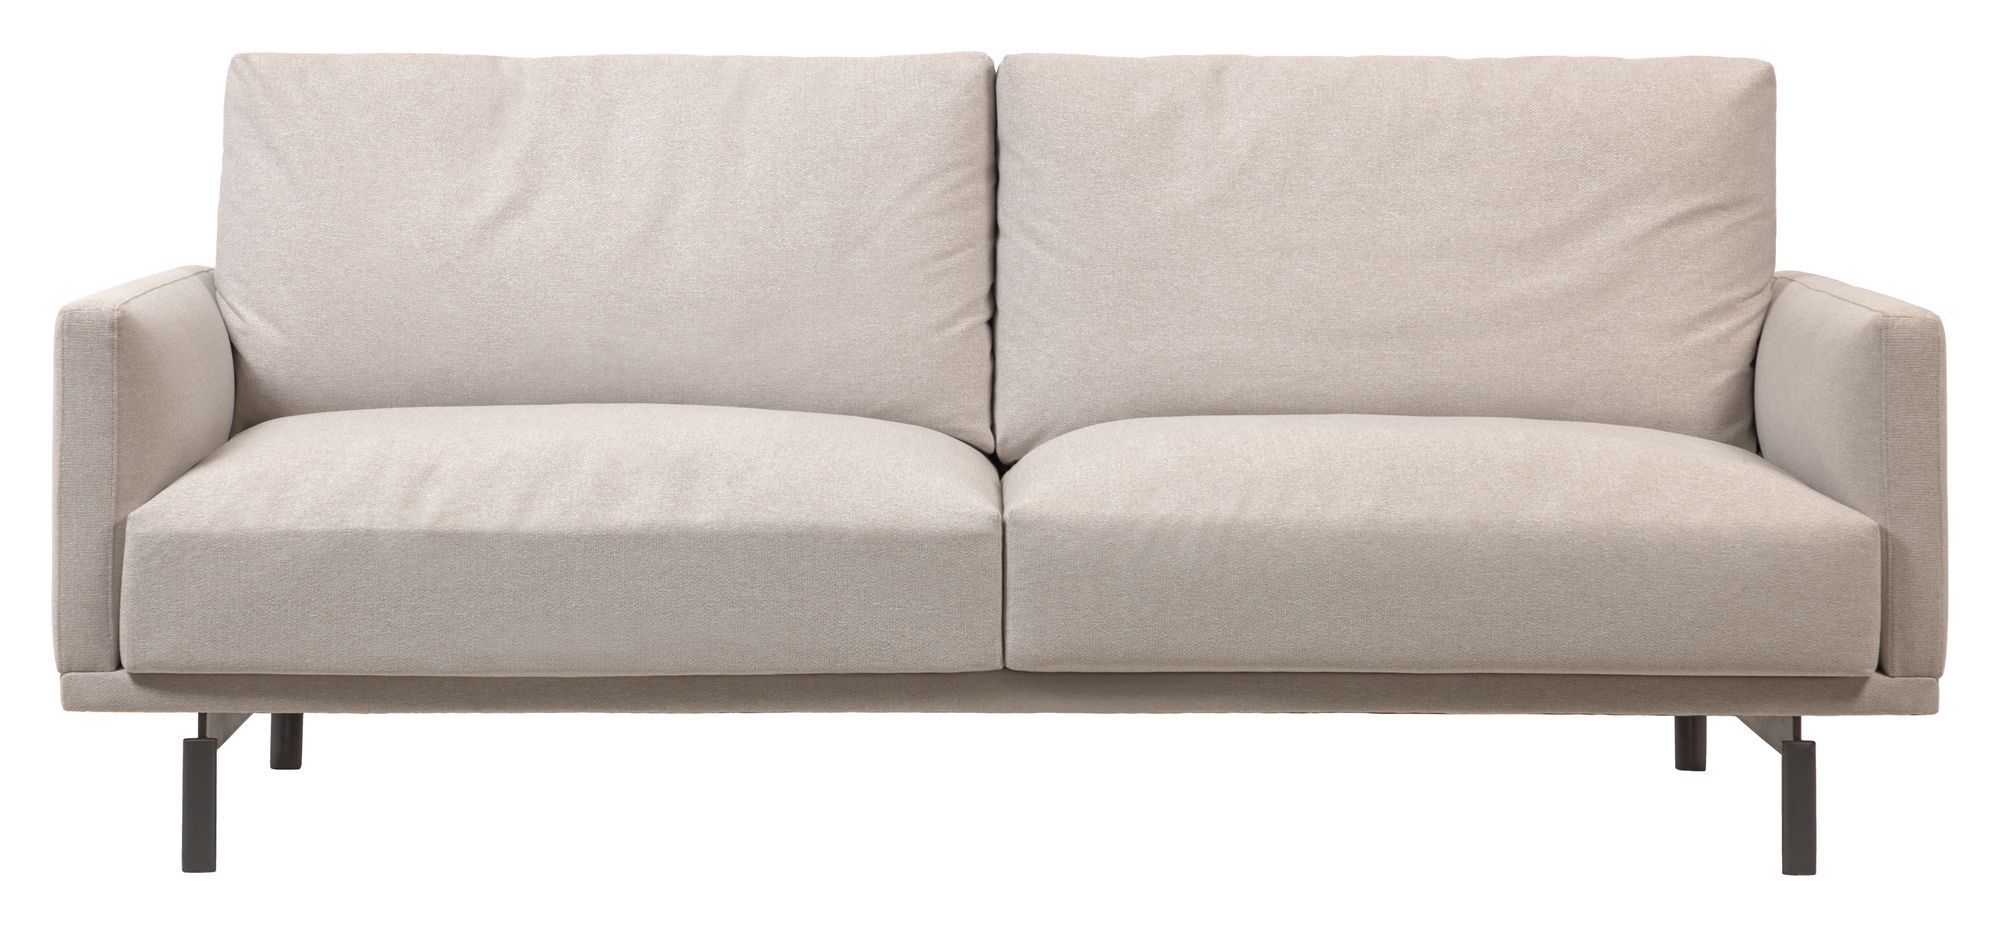 Kave Home Galene 3-pers. Sofa - Beige Chenille   Unoliving